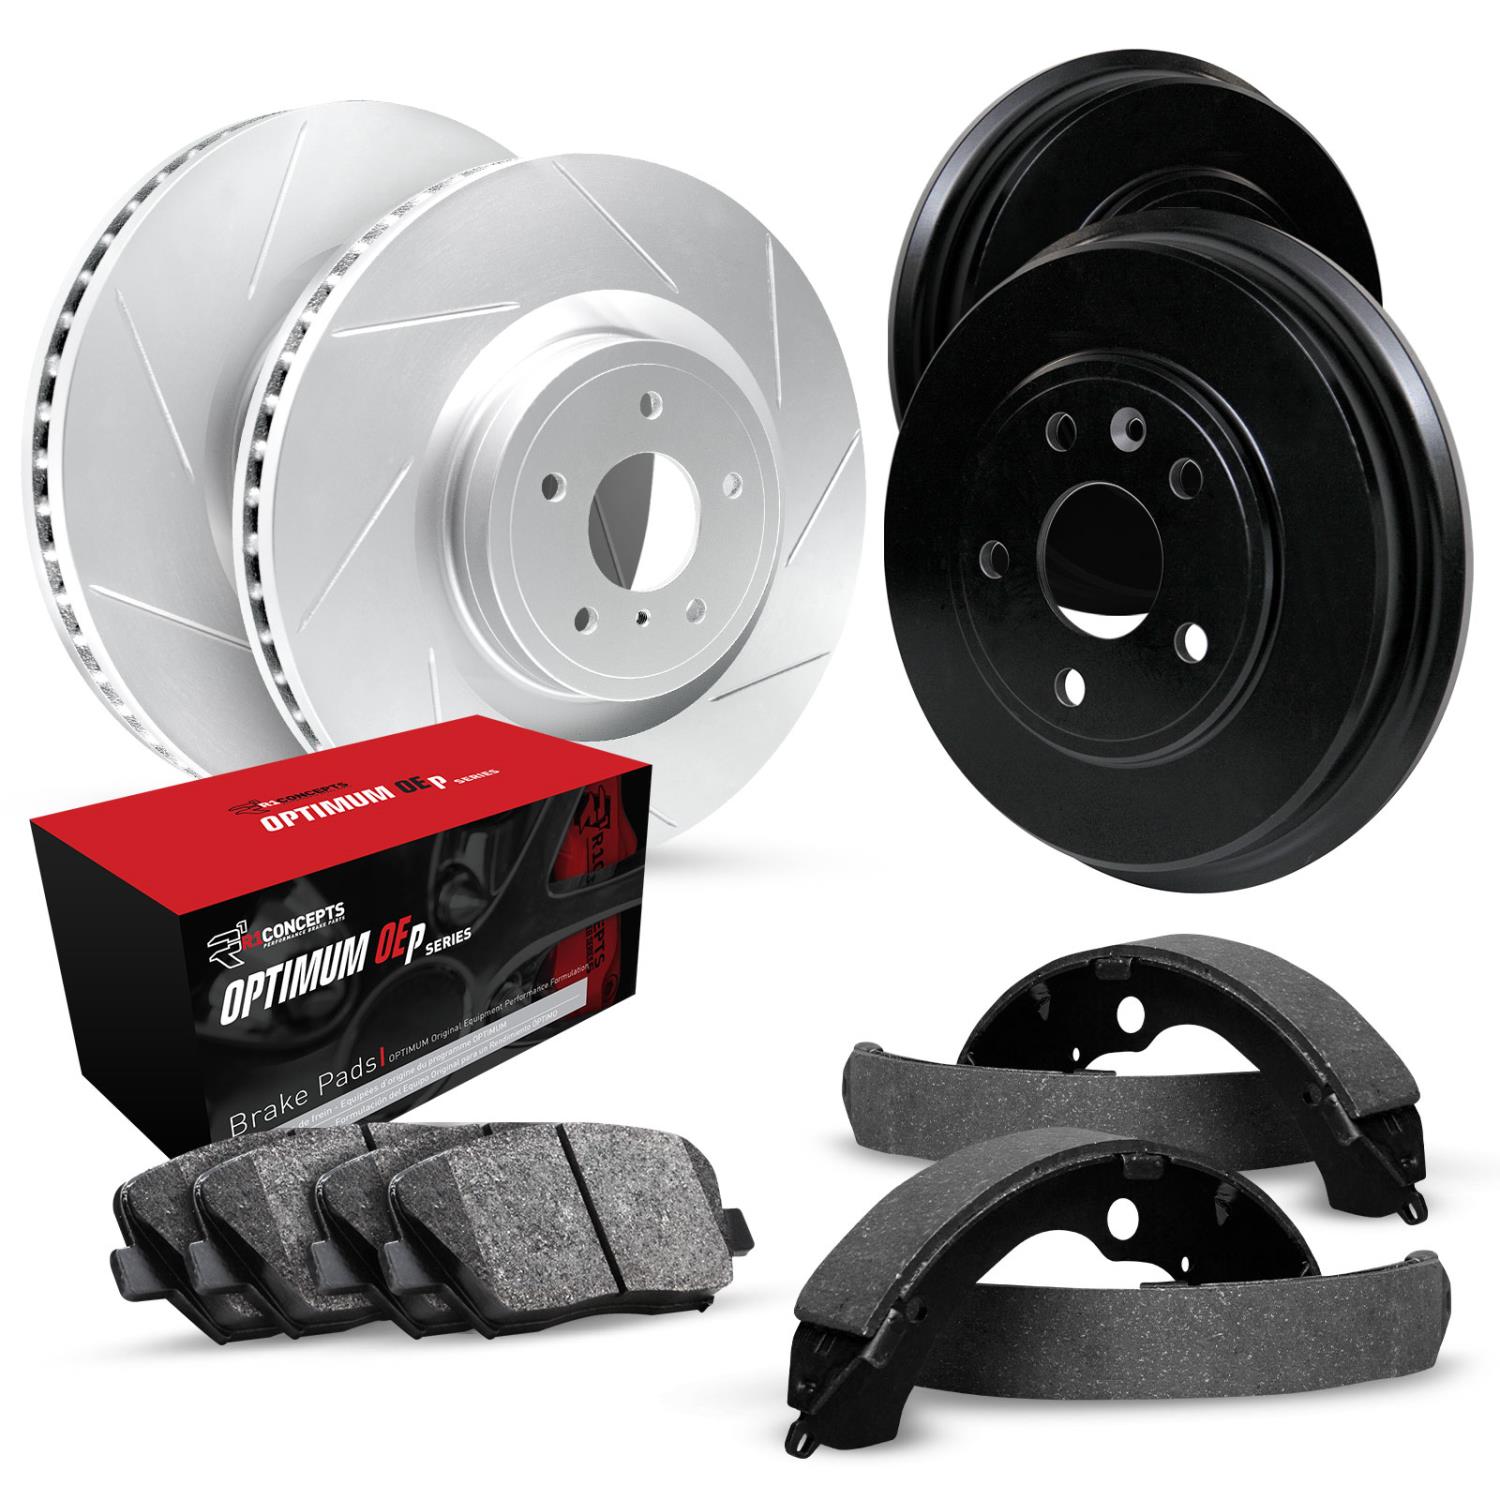 GEO-Carbon Slotted Brake Rotor & Drum Set w/Optimum OE Pads & Shoes, 2002-2007 GM, Position: Front & Rear